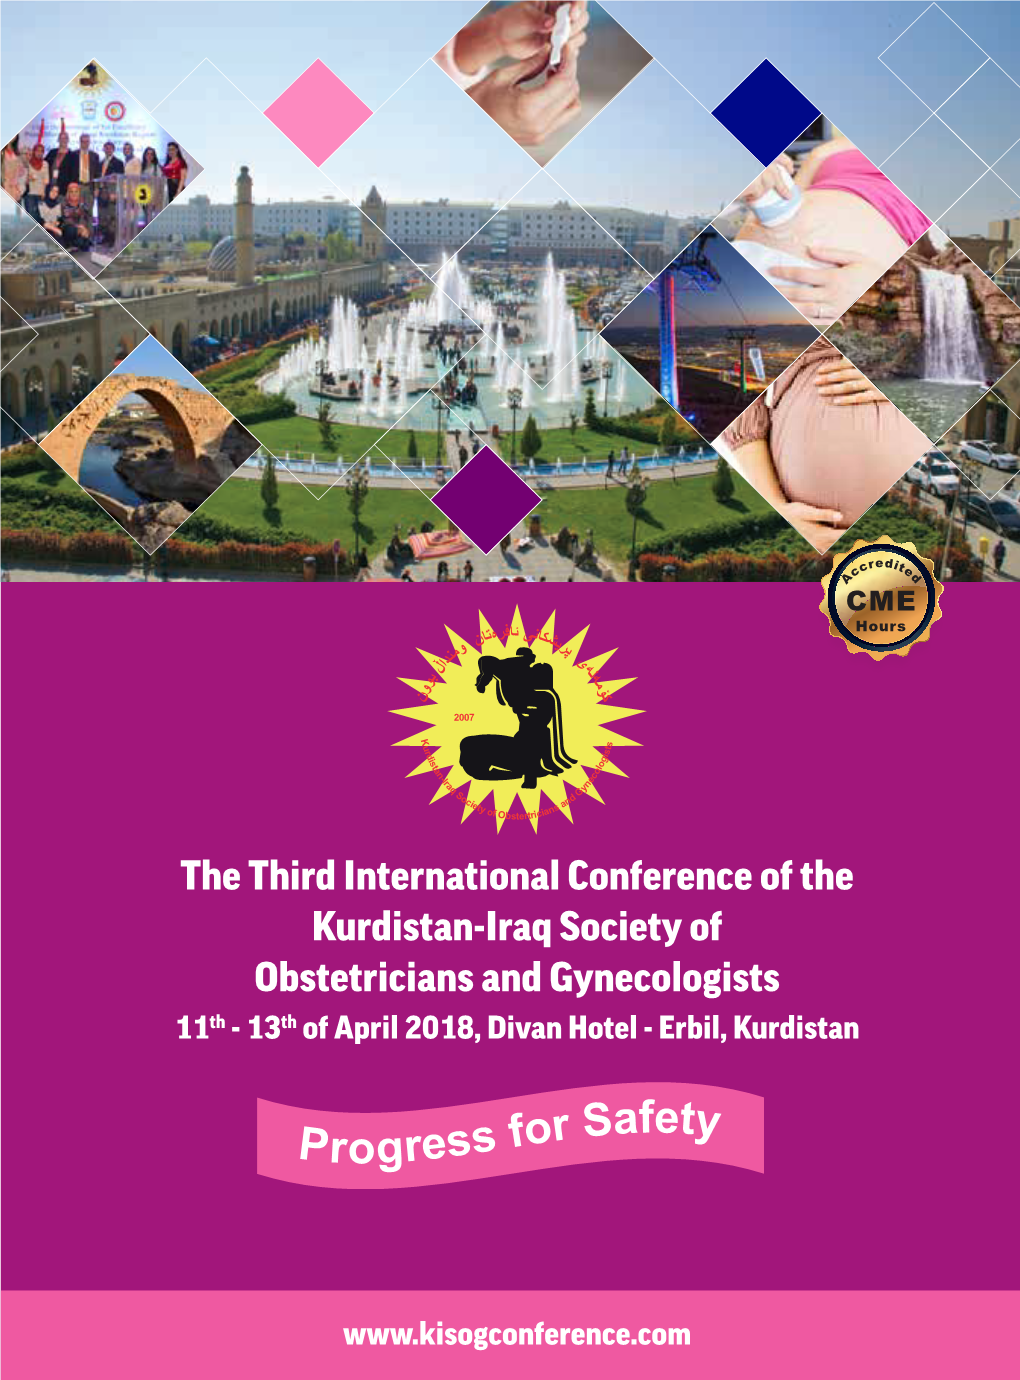 The Third International Conference of the Kurdistan-Iraq Society of Obstetricians and Gynecologists 11Th - 13Th of April 2018, Divan Hotel - Erbil, Kurdistan